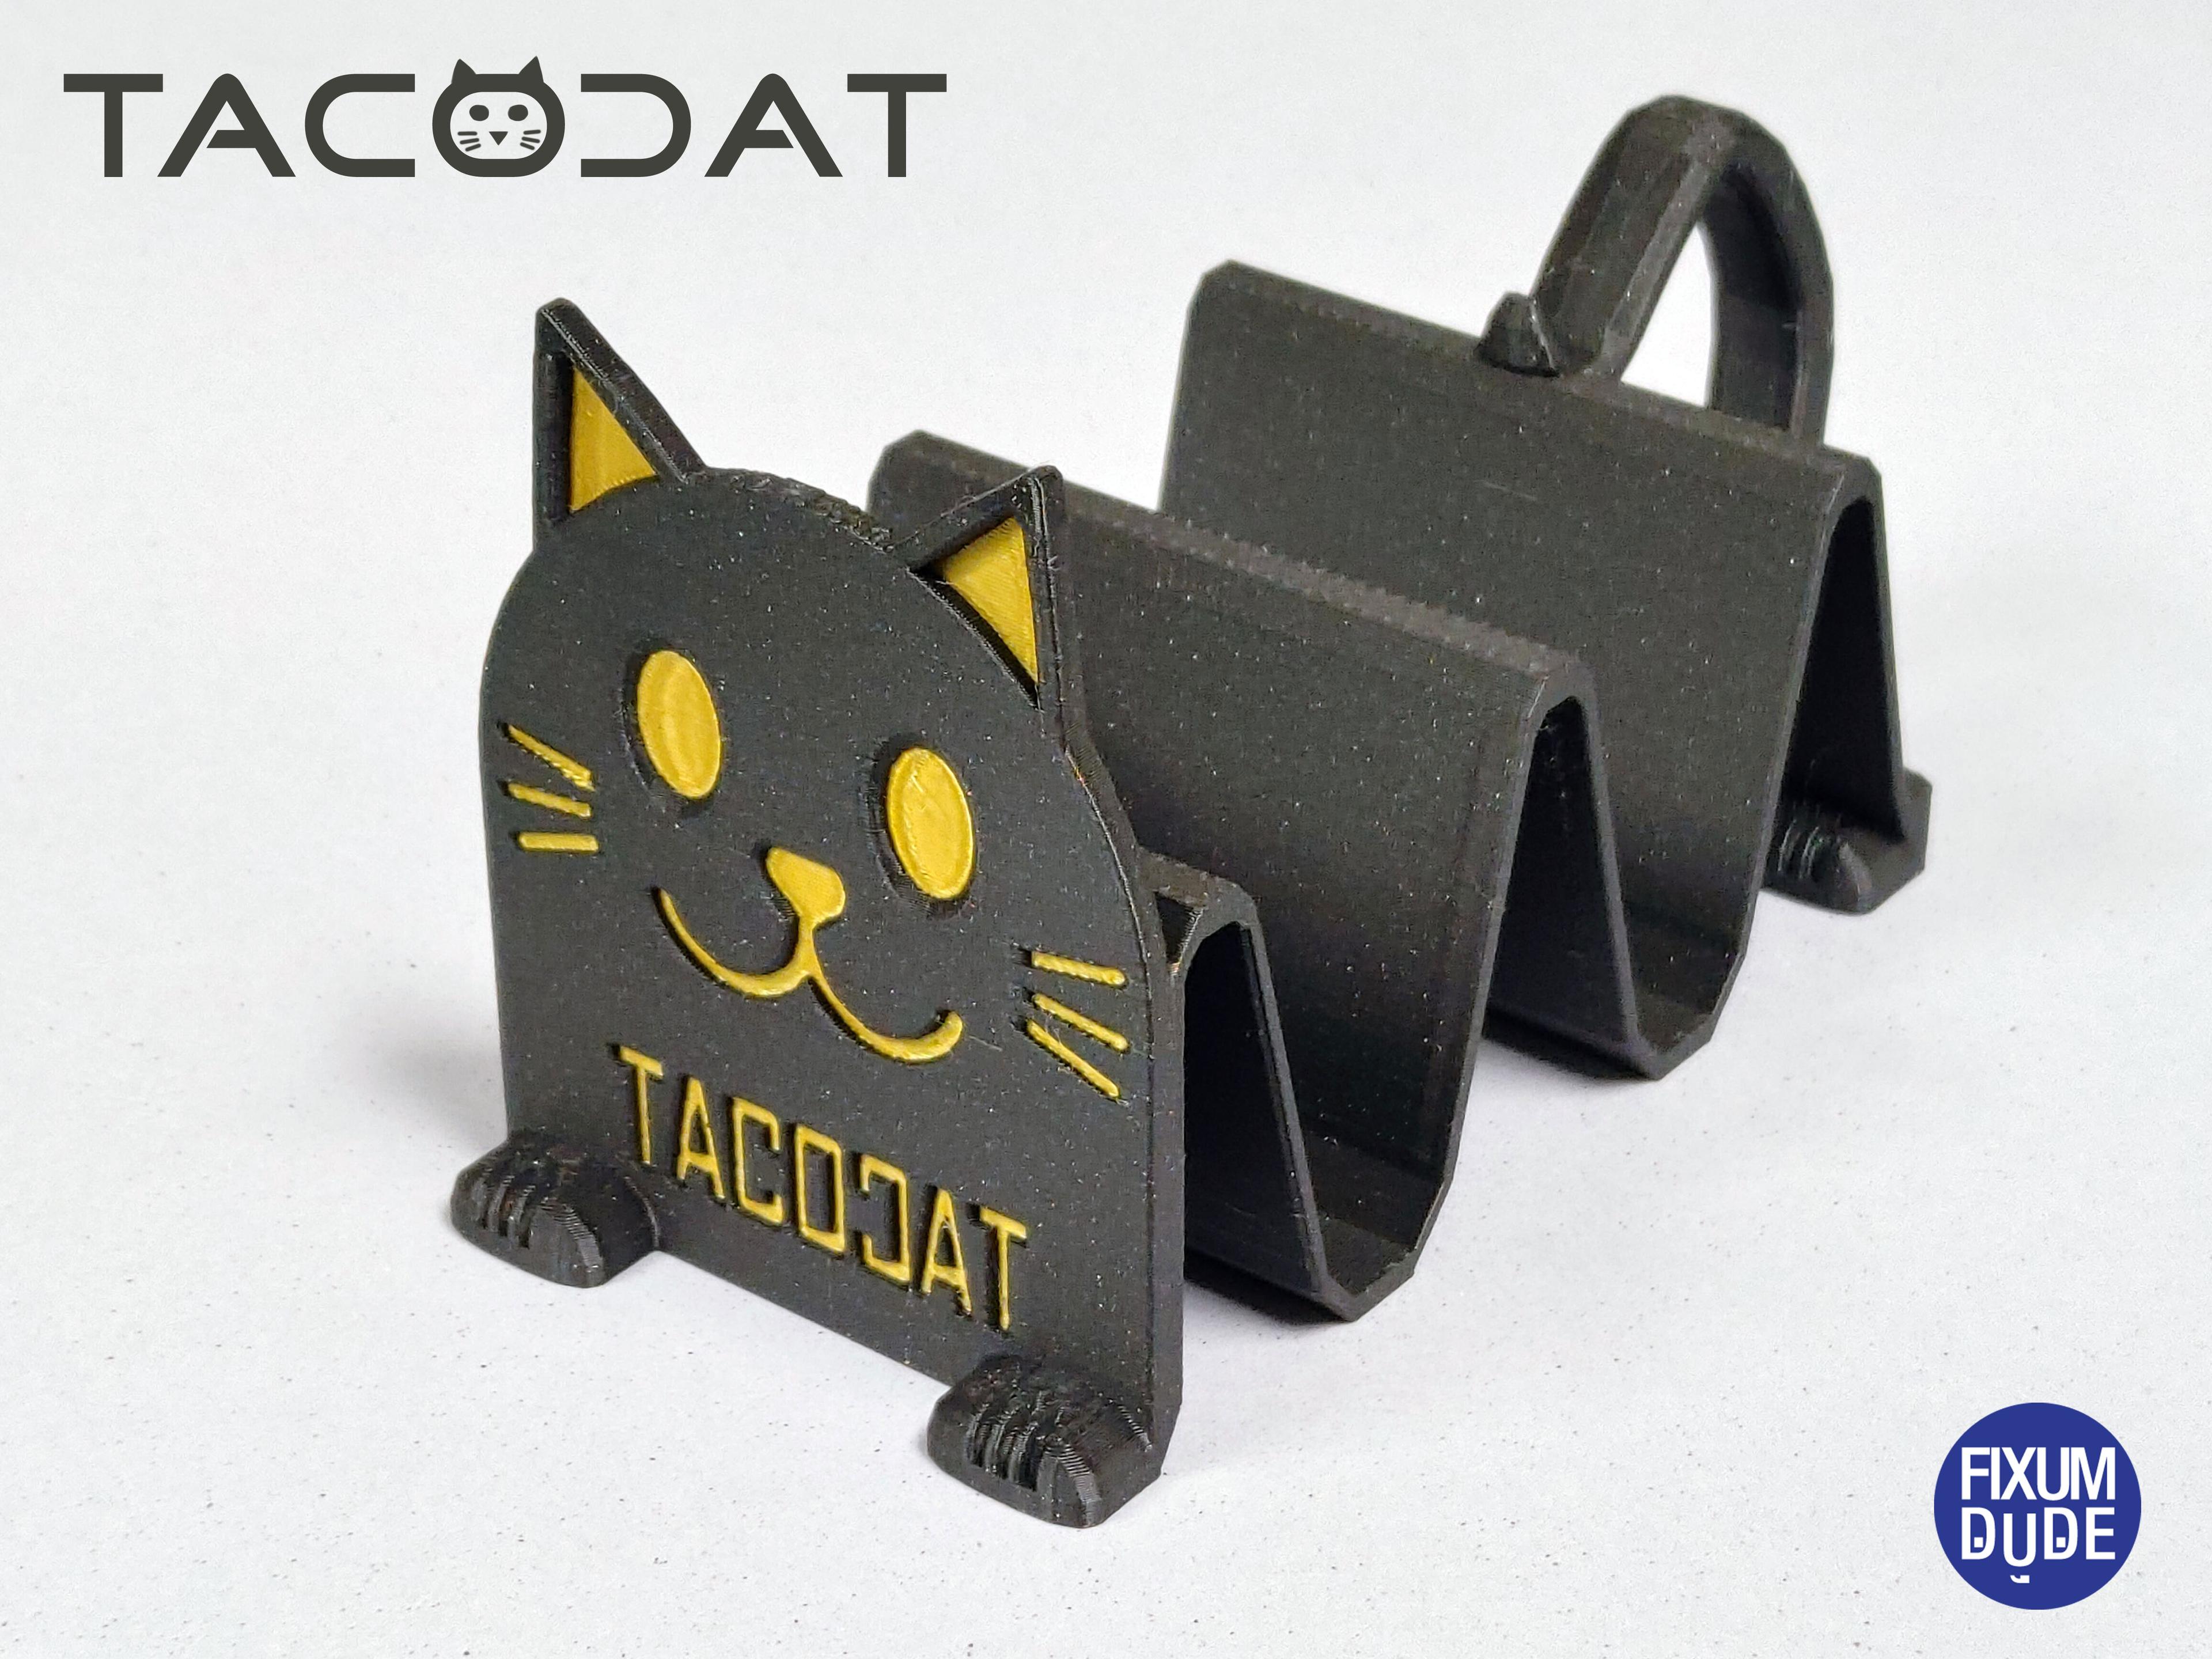 Taco Cat taco holder with handle 3d model